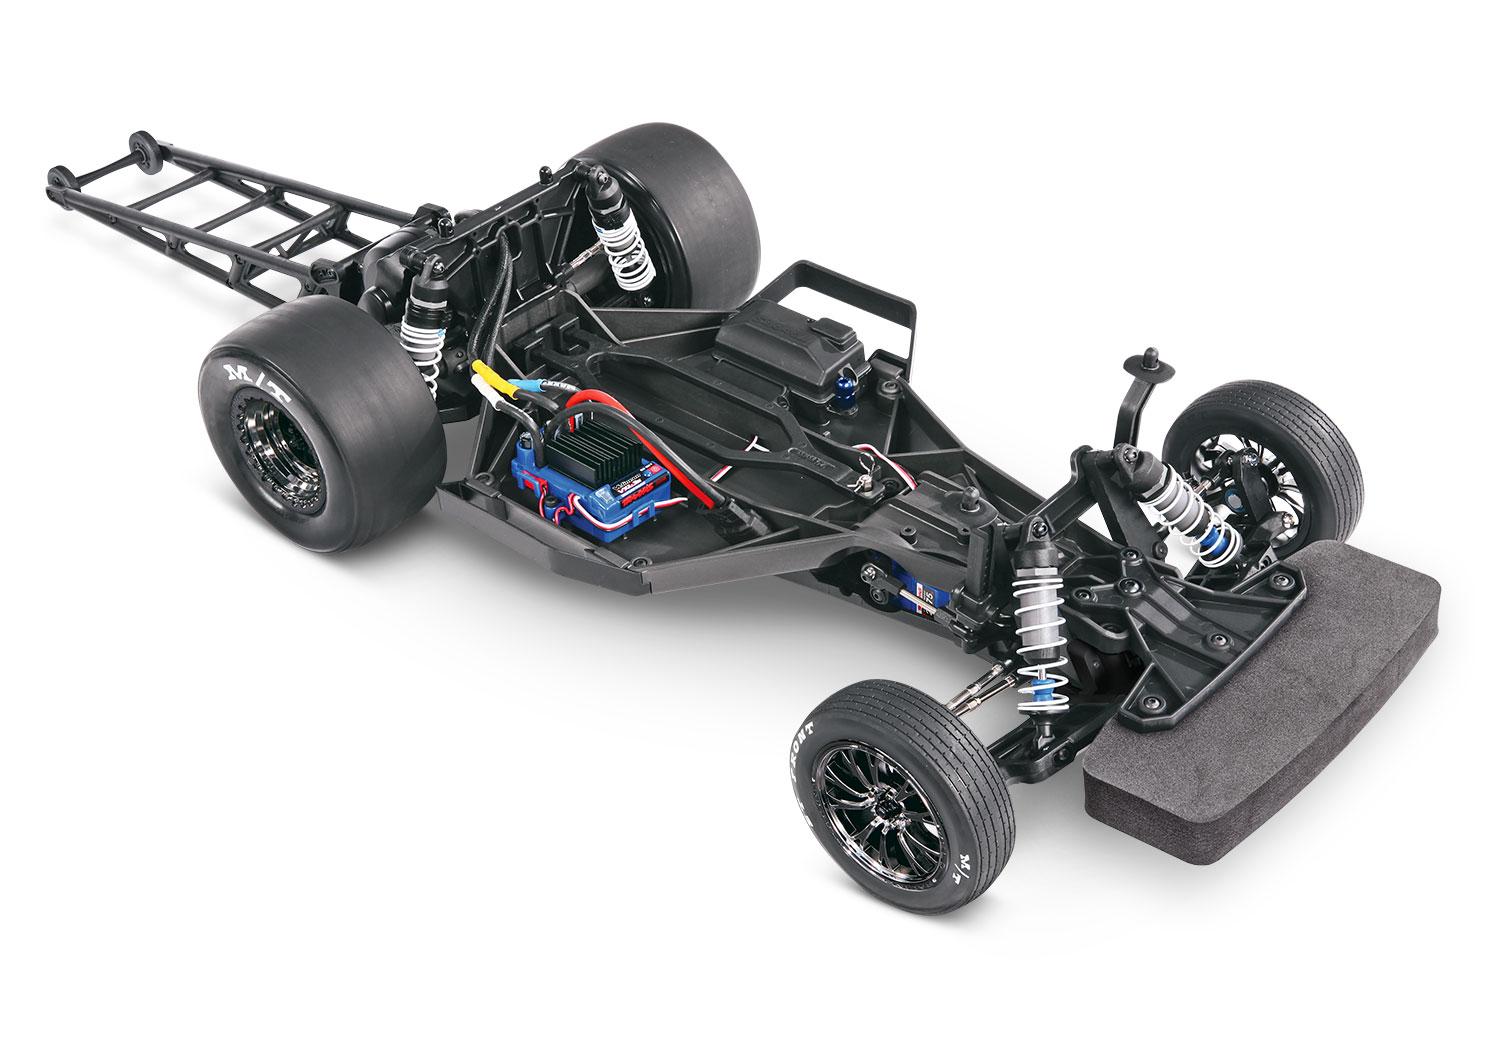 Traxxas Drag Slash Mustang Body: Maximize Your Traxxas Drag Slash With Compatible Models and Parts